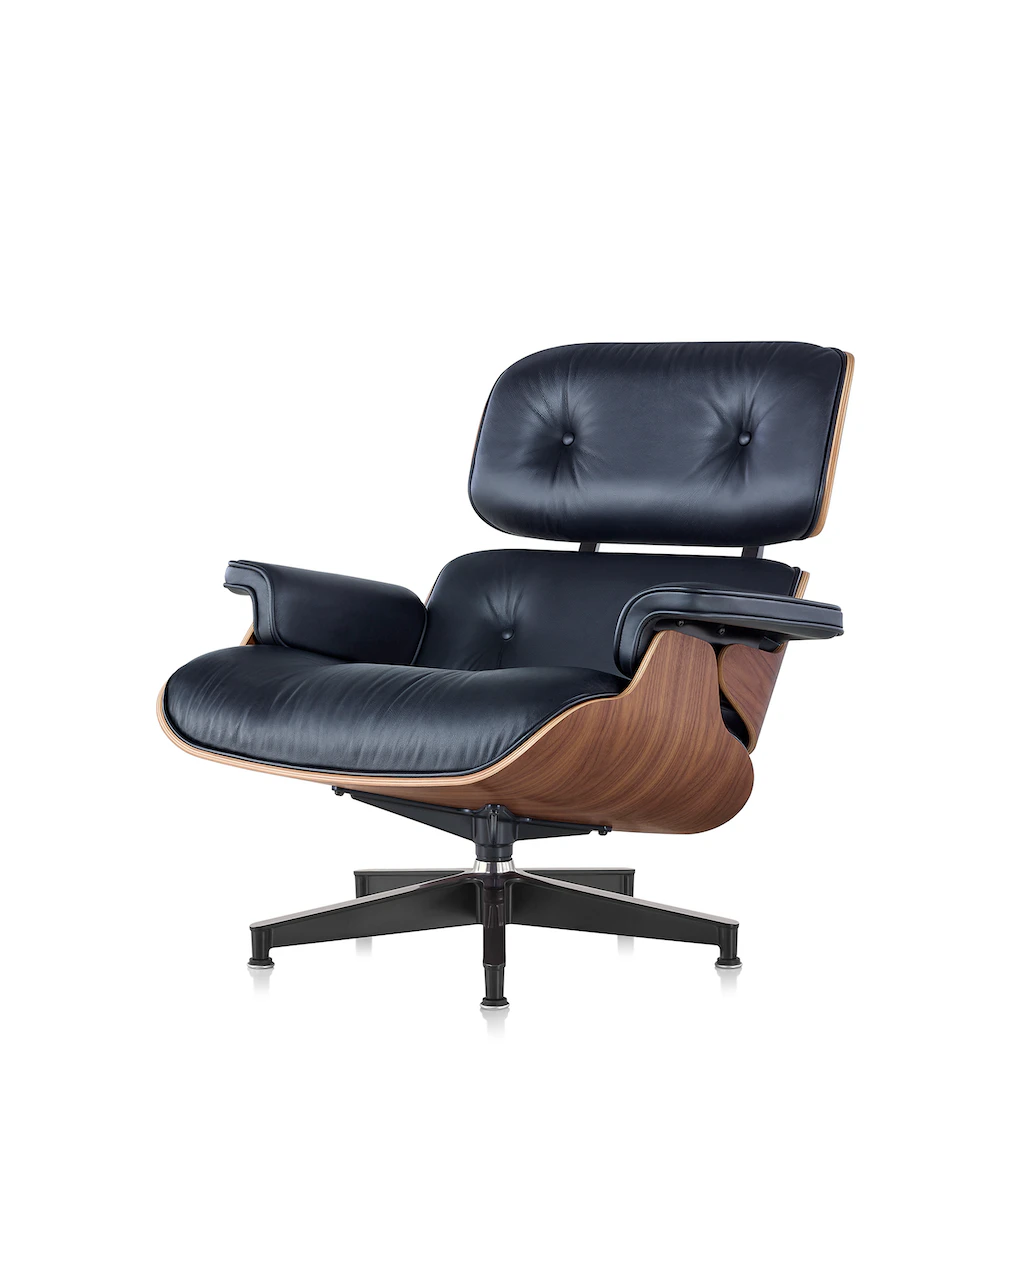 Eames lounge chair classic at WorkArena